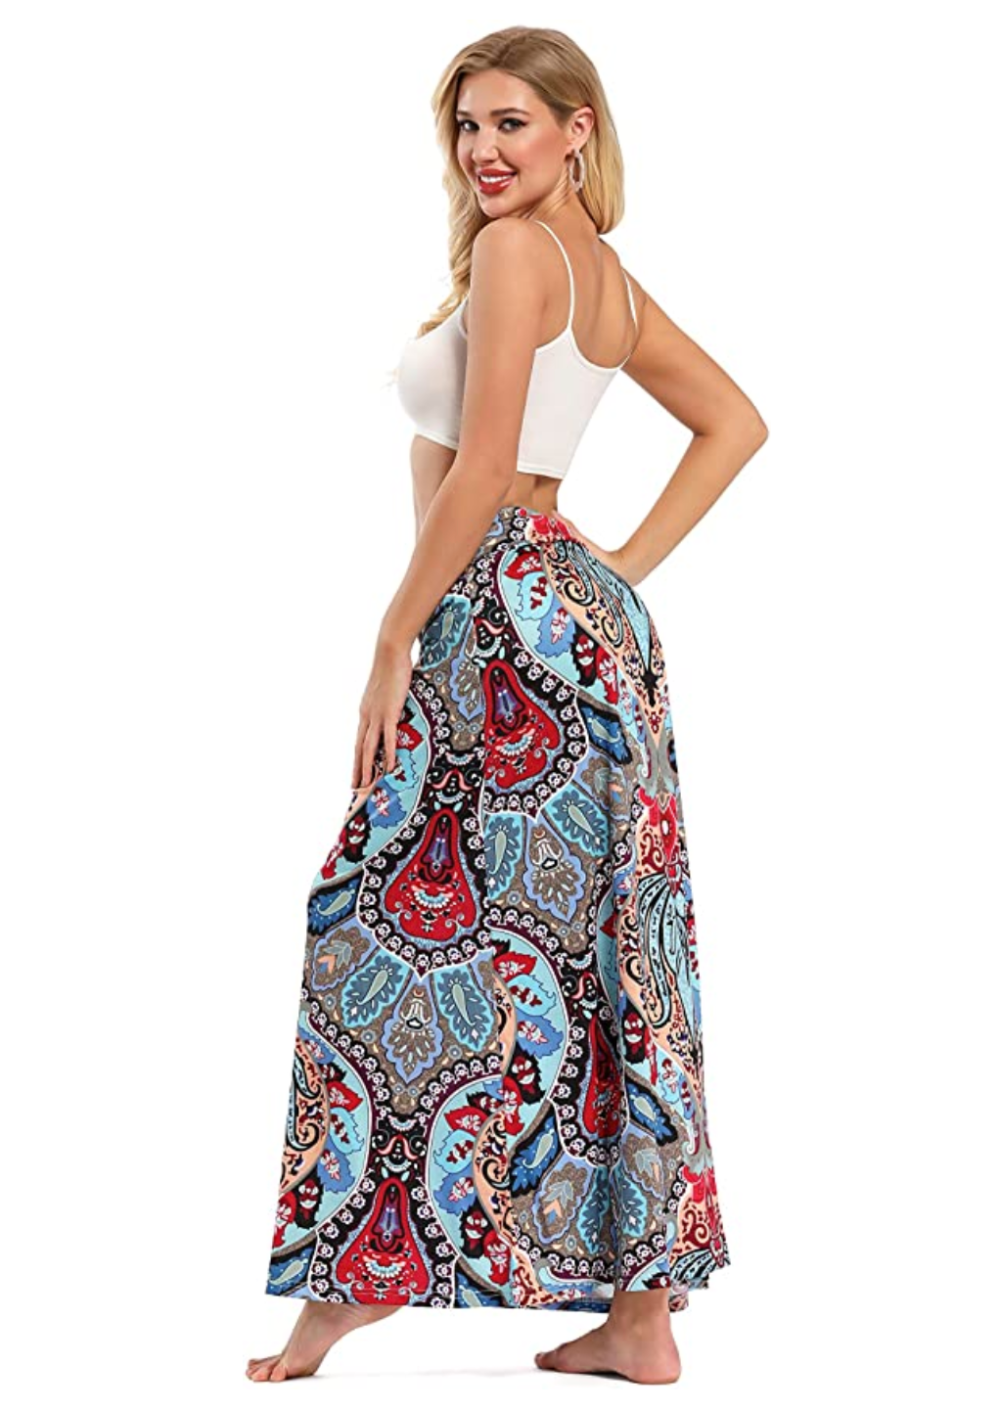 Yinggeli Maxi Skirt Has a Seriously Comfortable and Flattering Fit ...